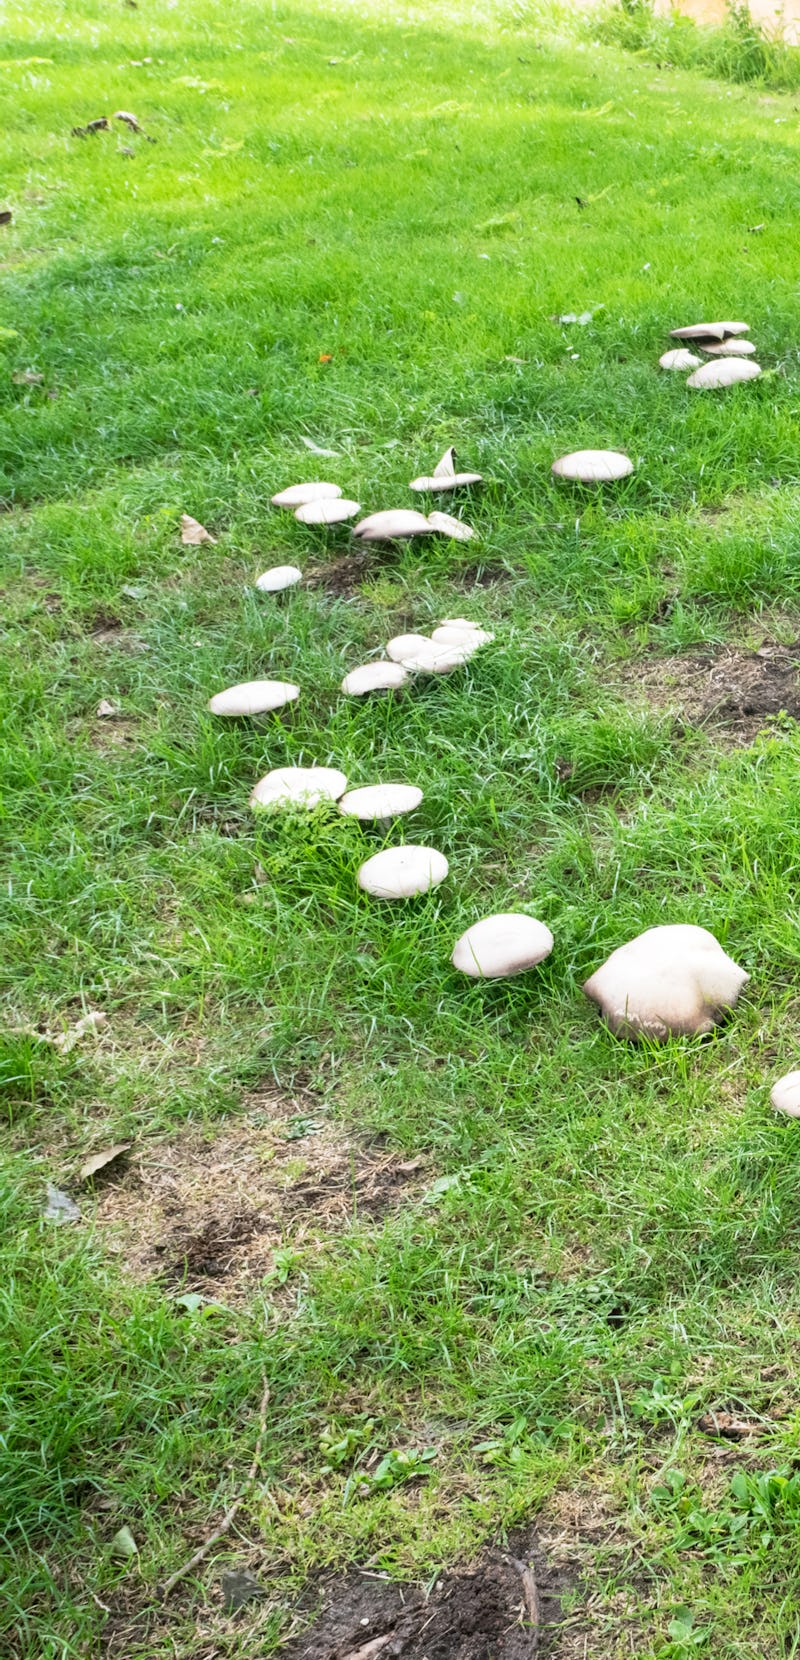 Fairy ring of white mushrooms growing on field of grass